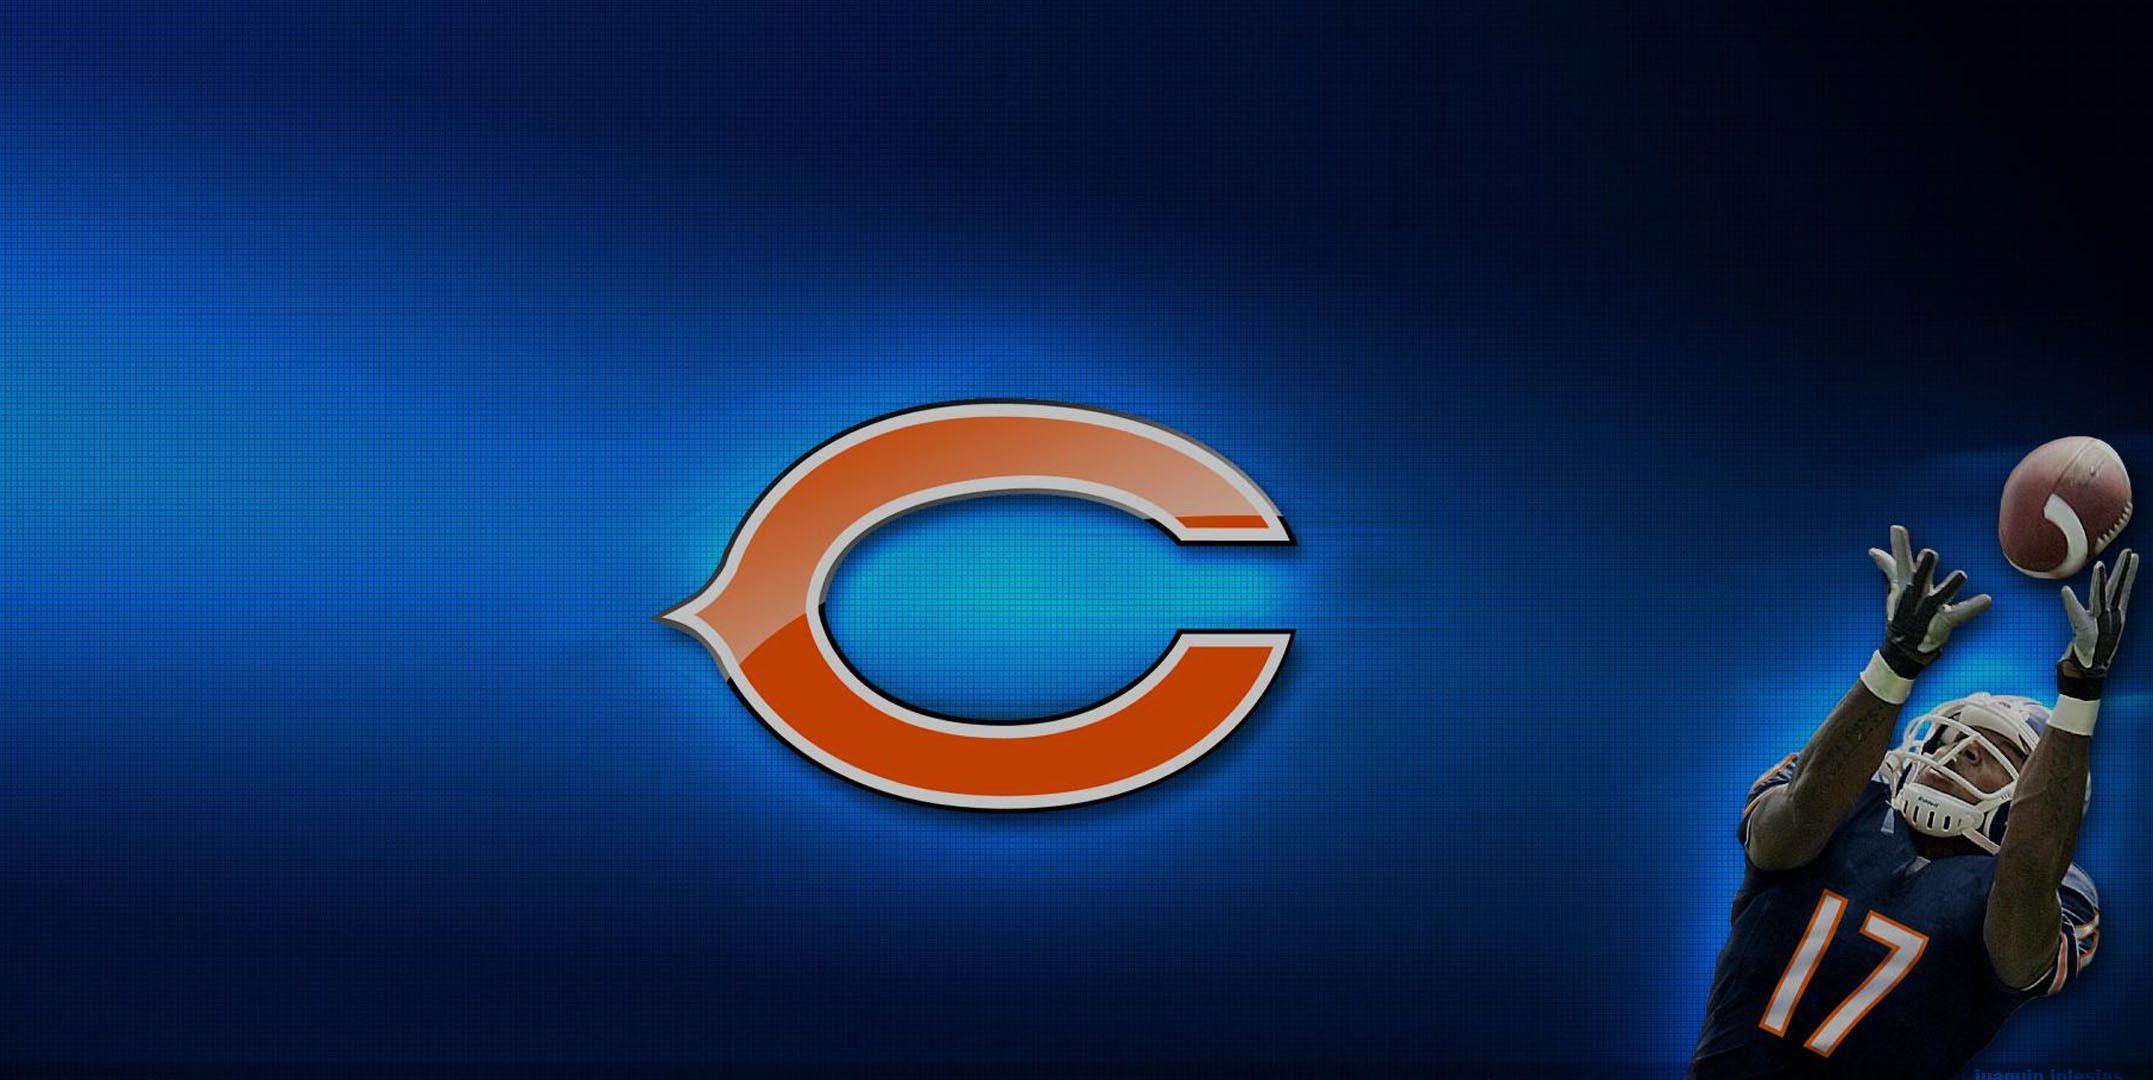 Chicago Bears Wallpaper Image Photo Picture Background